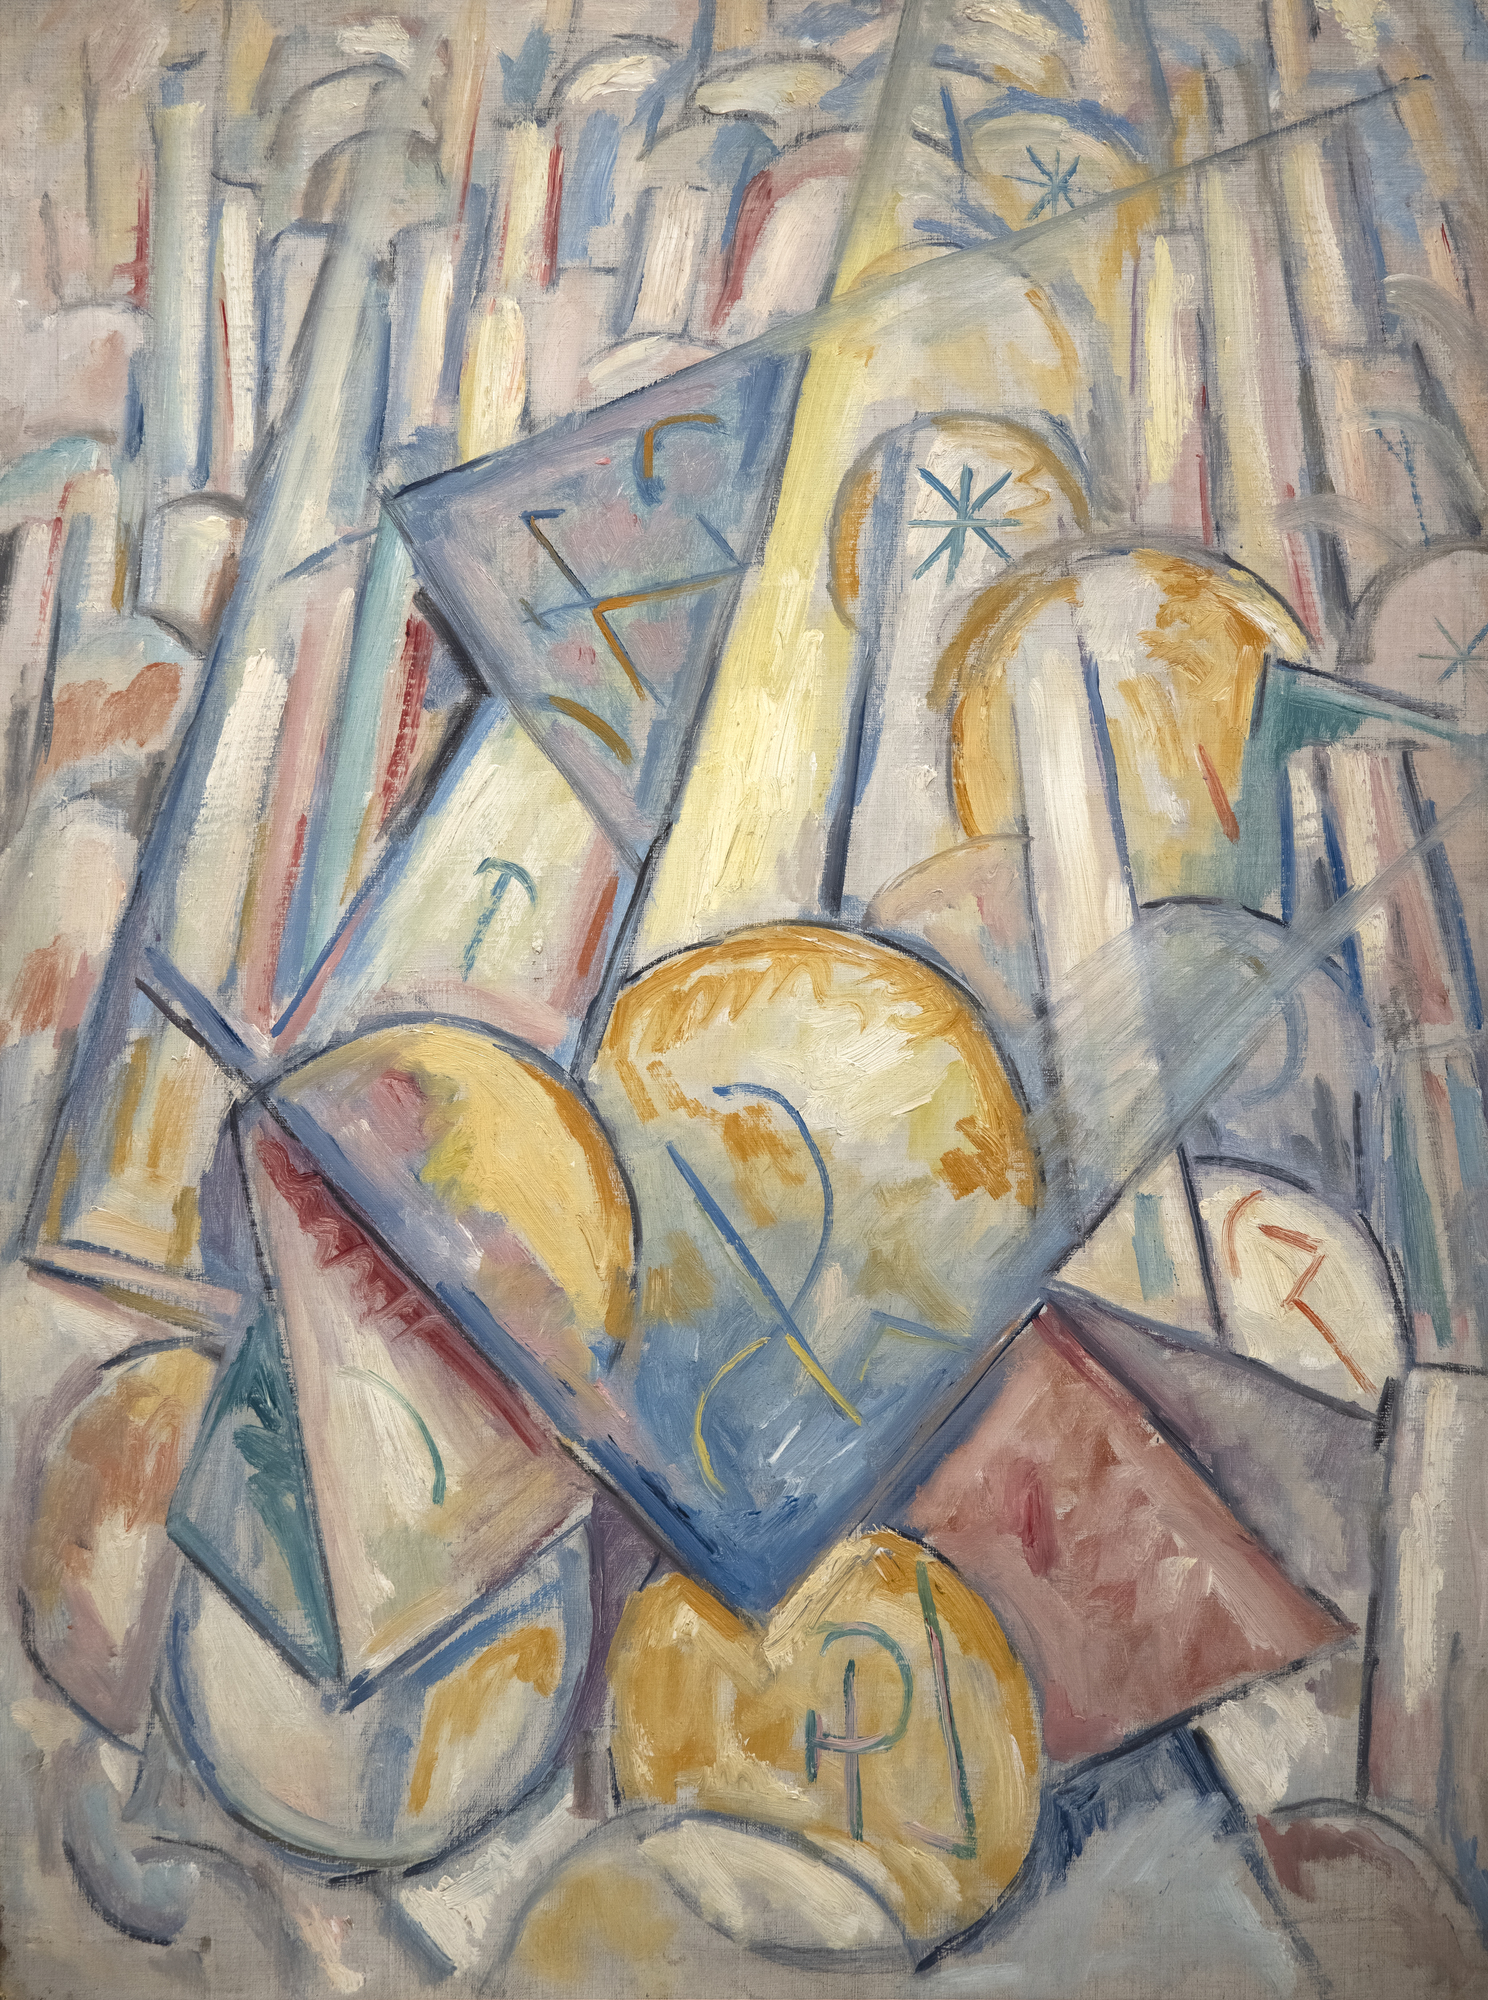 Shortly after arriving in Paris by April 1912, Marsden Hartley received an invitation. It had come from Gertrude Stein and what he saw at her 27 rue de Fleurus flat stunned him. Despite his presumptions and preparedness, “I had to get used to so much of everything all at once…a room full of staggering pictures, a room full of strangers and two remarkable looking women, Alice and Gertrude Stein…I went often I think after that on Saturday evenings — always thinking, in my reserved New England tone, ‘ how do people do things like that — let everyone in off the street to look at their pictures?… So one got to see a vast array of astounding pictures — all burning with life and new ideas — and as strange as the ideas seemed to be — all of them terrifically stimulating — a new kind of words for an old theme.” (Susan Elizabeth Ryan, The Autobiography of Marsden Hartley, pg. 77)&lt;br&gt;&lt;br&gt;The repeated visits had a profound effect. Later that year, Hartley was clearly disappointed when Arthur B. Davies and Walt Kuhn chose two of his still-life paintings for the upcoming New York Armory show in February 1913. “He (Kuhn) speaks highly of them (but) I would not have chosen them myself chiefly because I am so interested at this time in the directly abstract things of the present. But Davies says that no American has done this kind of thing and they would (not) serve me and the exhibition best at this time.” (Correspondence, Marsden Hartley to Alfred Stieglitz, early November 1912) A month later, he announced his departure from formal representationalism in “favor of intuitive abstraction…a variety of expression I find to be closest to my temperament and ideals. It is not like anything here. It is not like Picasso, it is not like Kandinsky, not like any cubism. For want of a better name, subliminal or cosmic cubism.” (Correspondence, Marsden Hartley to Alfred Stieglitz, December 1912)&lt;br&gt;&lt;br&gt;At the time, Hartley consumed Wassily Kandinsky’s recently published treatise Uber das Geistige in der Kunst (The Art of Spiritual Harmony) and Stieglitz followed the artist’s thoughts with great interest. For certain, they both embraced musical analogy as an opportunity for establishing a new visual language of abstraction. Their shared interest in the synergetic effects of music and art can be traced to at least 1909 when Hartley exhibited landscape paintings of Maine under titles such as “Songs of Autumn” and “Songs of Winter” at the 291 Gallery. The gravity of Hartley’s response to the treatise likely sparked Stieglitz’s determination to purchase Kandinsky’s seminal painting Improvisation no. 27 (Garden of Love II) at the Armory Show. As for Hartley, he announced to his niece his conviction that an aural/vision synesthetic pairing of art and music was a way forward for modern art. “Did you ever hear of anyone trying to paint music — or the equivalent of sound in color?…there is only one artist in Europe working on it (Wassily Kandinsky) and he is a pure theorist and his work is quite without feeling — whereas I work wholly from intuition and the subliminal.” (D. Cassidy, Painting the Musical City: Jazz and Cultural Identity in American Art, Washington, D.C., pg. 6)&lt;br&gt;&lt;br&gt;In Paris, during 1912 and 1913 Hartley was inspired to create a series of six musically themed oil paintings, the first of which, Bach Preludes et Fugues, no. 1 (Musical Theme), incorporates strong Cubist elements as well as Kandinsky’s essential spirituality and synesthesia. Here, incorporating both elements seems particularly appropriate. Whereas Kandinsky’s concepts were inspired by Arnold Schoenberg’s twelve-tone method of composition whereby no note could be reused until the other eleven had been played, Hartley chose Bach’s highly structured, rigorously controlled twenty-four Preludes and Fugues from his Well-Tempered Clavier, each of which establishes an absolute tonality. The towering grid of Bach Preludes et Fugues, no. 1 suggests the formal structure of an organ, its pipes ever-rising under a high, vaulted church ceiling to which Hartley extends an invitation to stand within the lower portion of the picture plane amongst the triangular and circular ‘sound tesserae’ and absorb its essential sonority and deeply reverberating sound. All of it is cast with gradients of color that conjures an impression of Cézanne’s conceptual approach rather than Picasso’s, Analytic Cubism. Yet Bach Preludes et Fugues, no. 1, in its entirety suggests the formal structural of Picasso’s Maisons à Horta (Houses on the Hill, Horta de Ebro), one of the many Picasso paintings Gertrude Stein owned and presumably staged in her residence on the many occasions he came to visit.